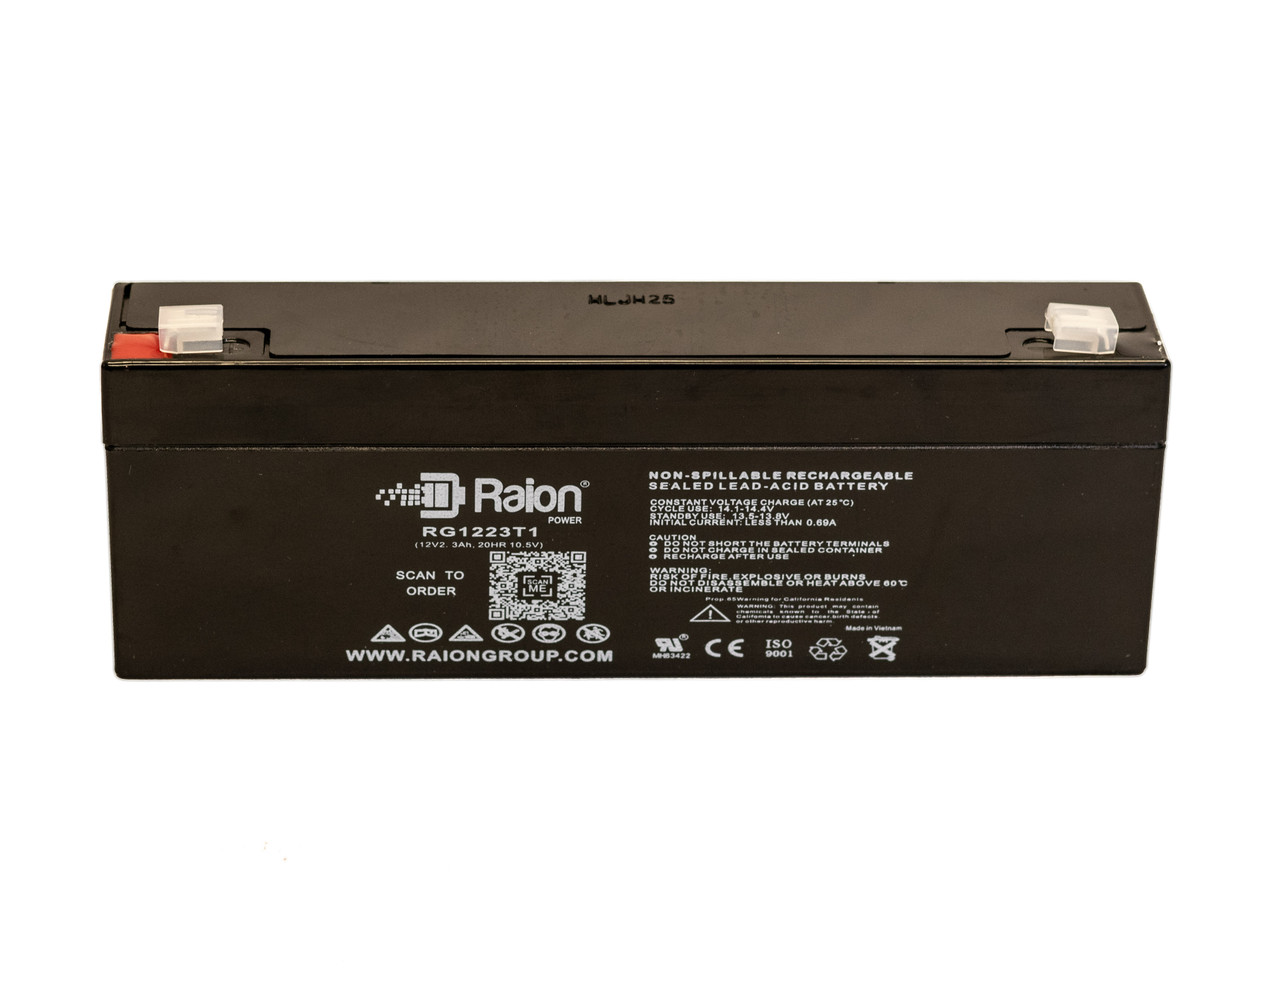 Raion Power 12V 2.3Ah SLA Battery With T1 Terminals For Baxter Healthcare Auto Syringe